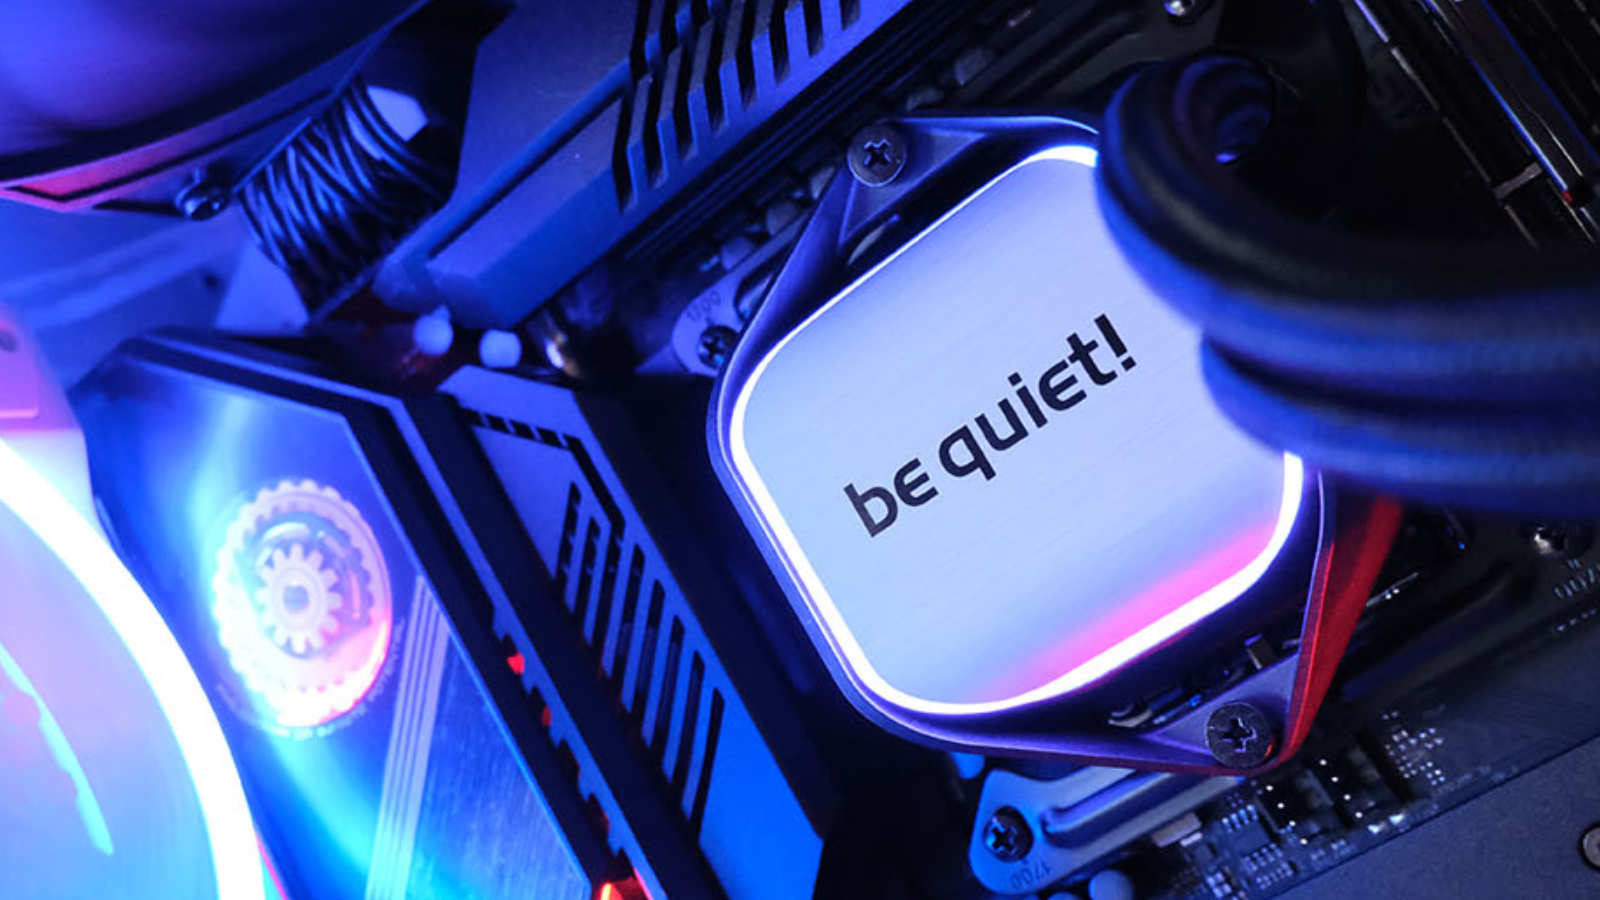 be quiet! Pure Loop 2 280mm AIO cooler with gorgeous blue and pink lighting.